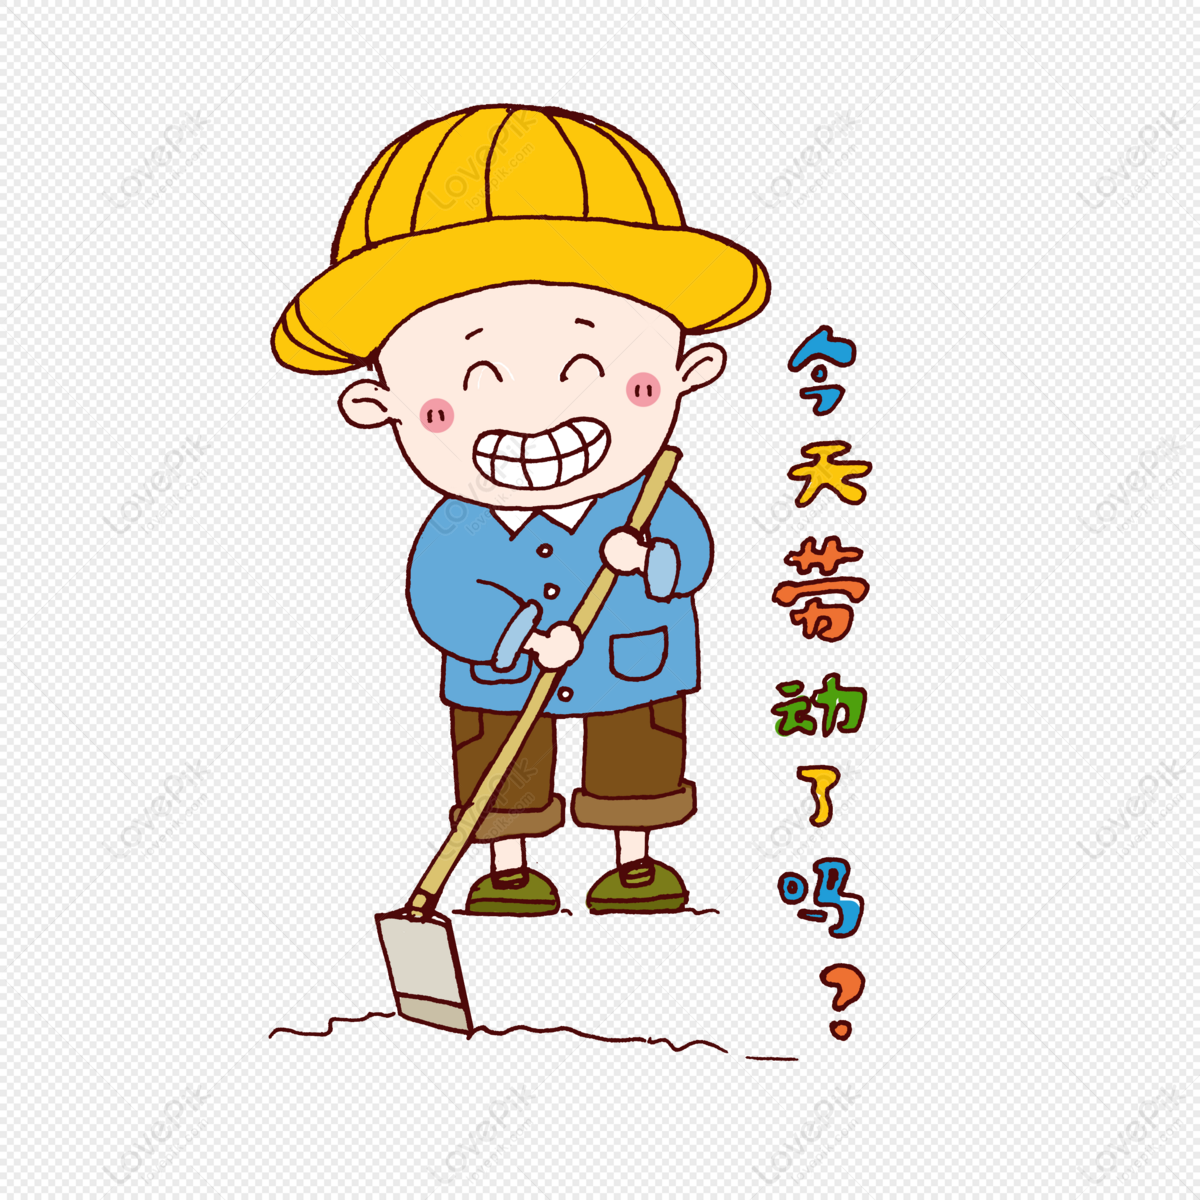 Labor Day Cartoon Characters PNG Picture And Clipart Image For Free  Download - Lovepik | 401051625